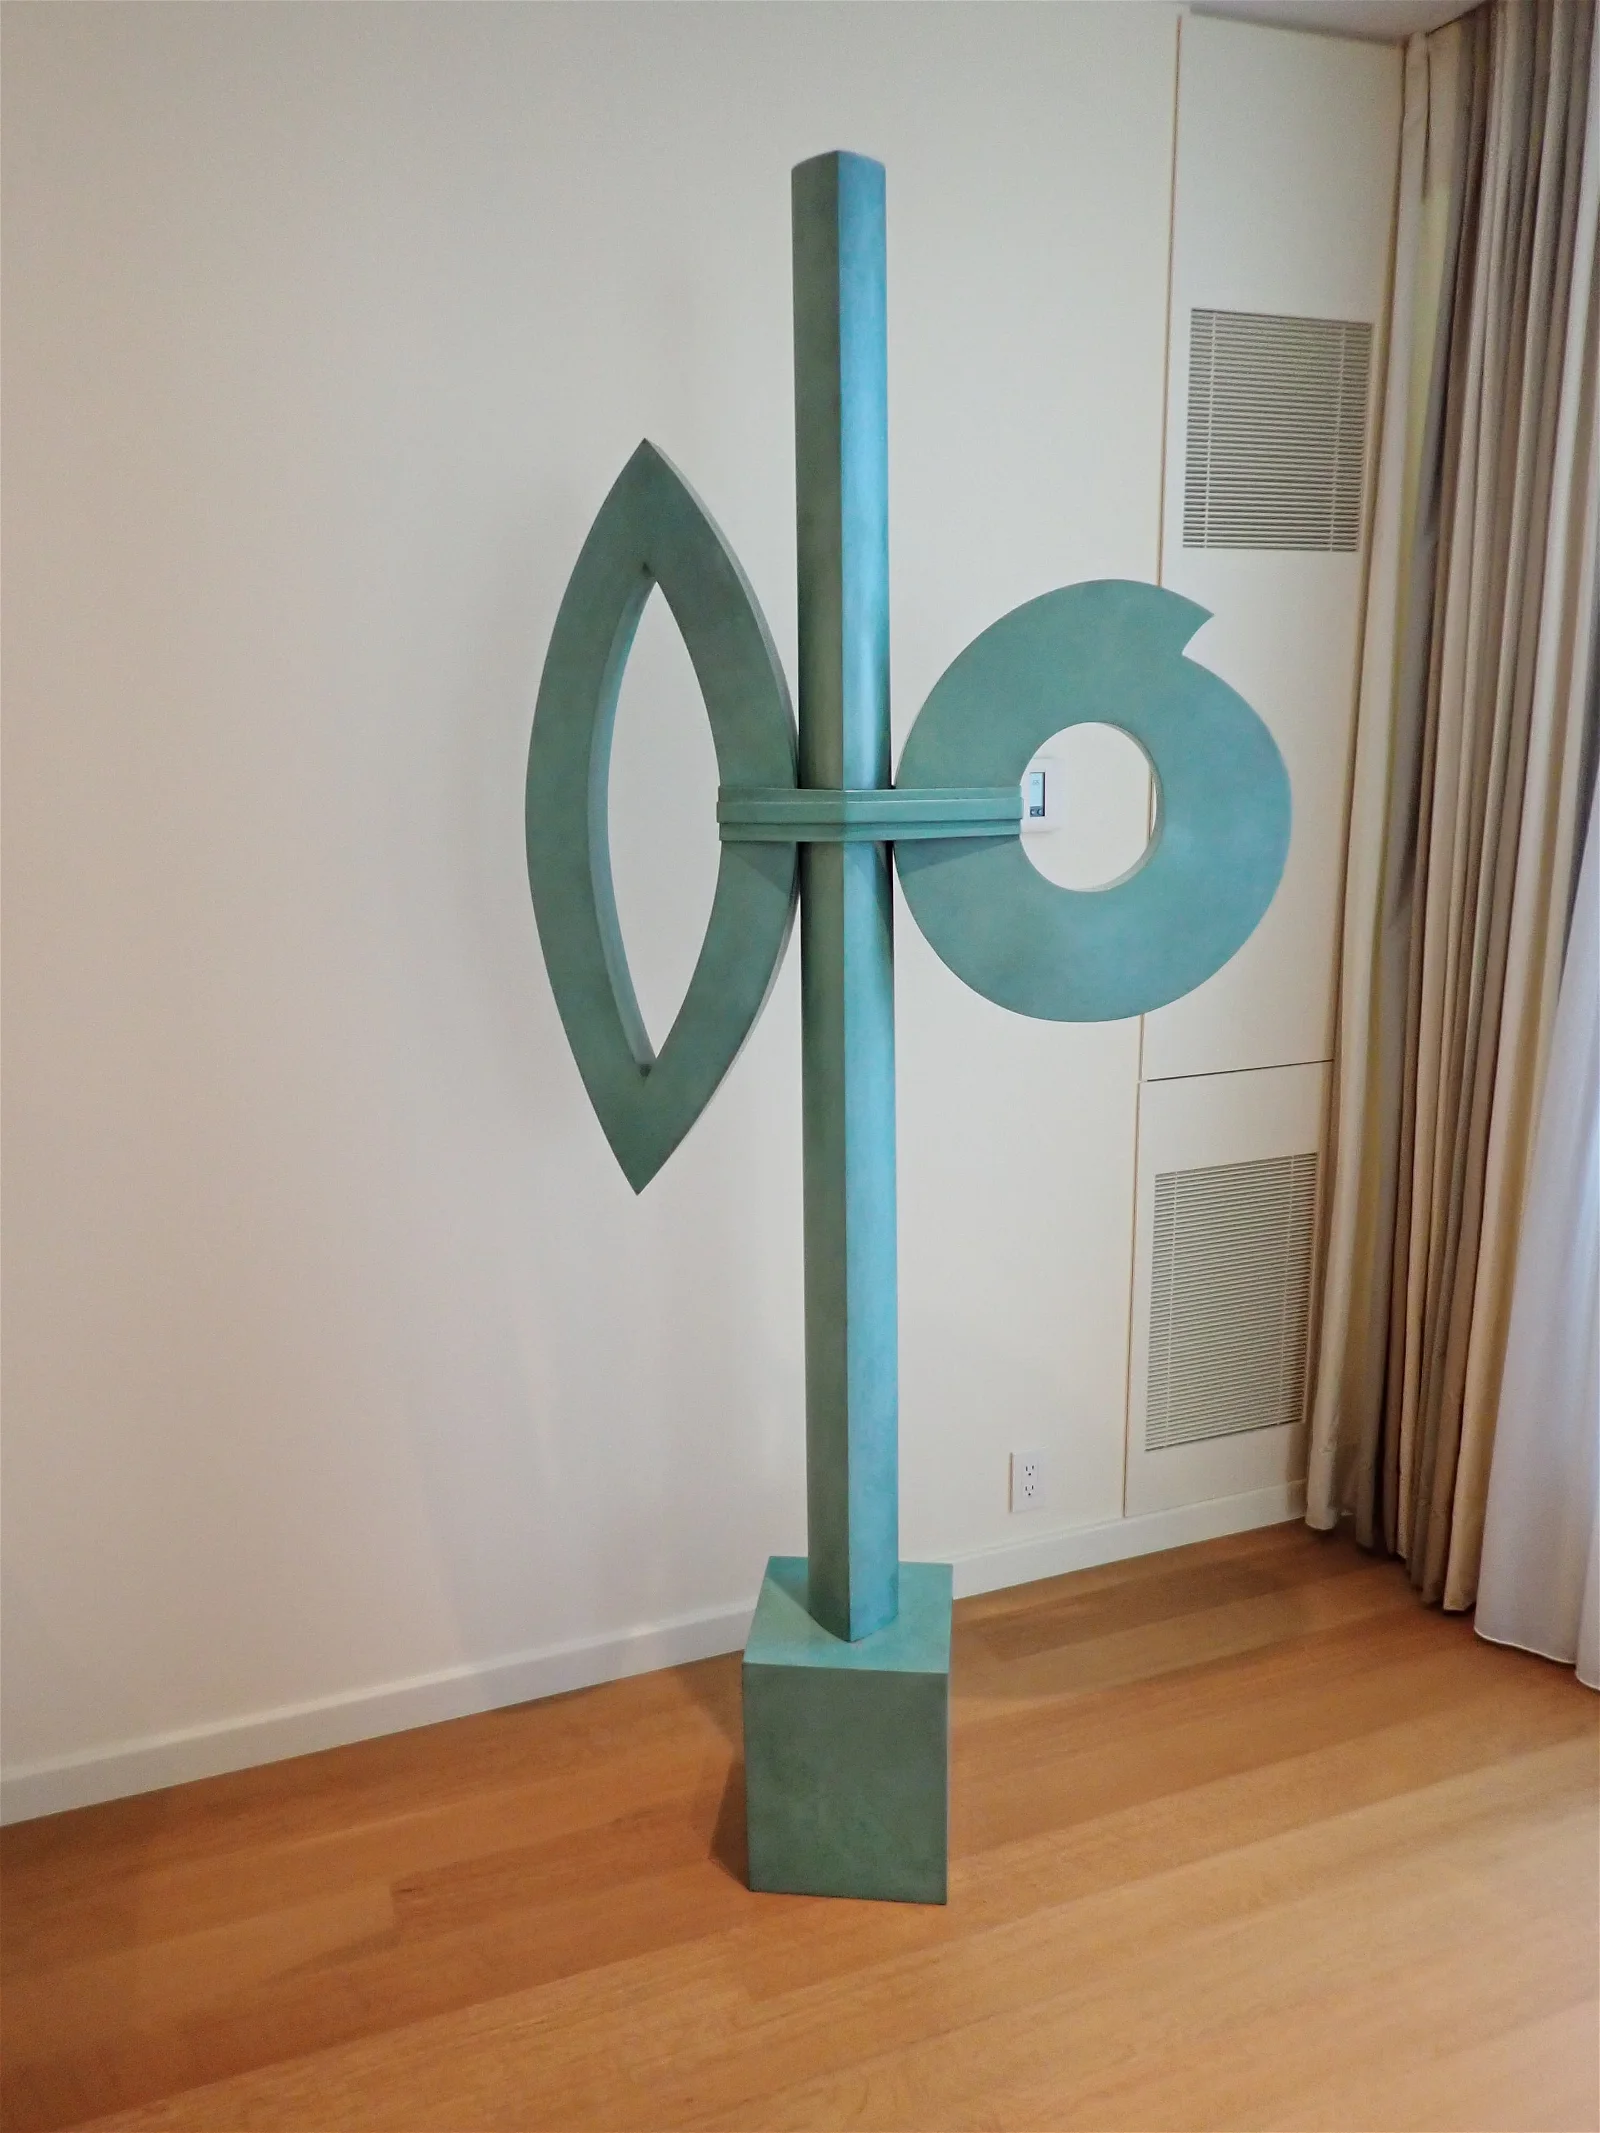 Jeffrey Maron Totemic Abstract Sculpture - sold at auction for $325 from Boston estate